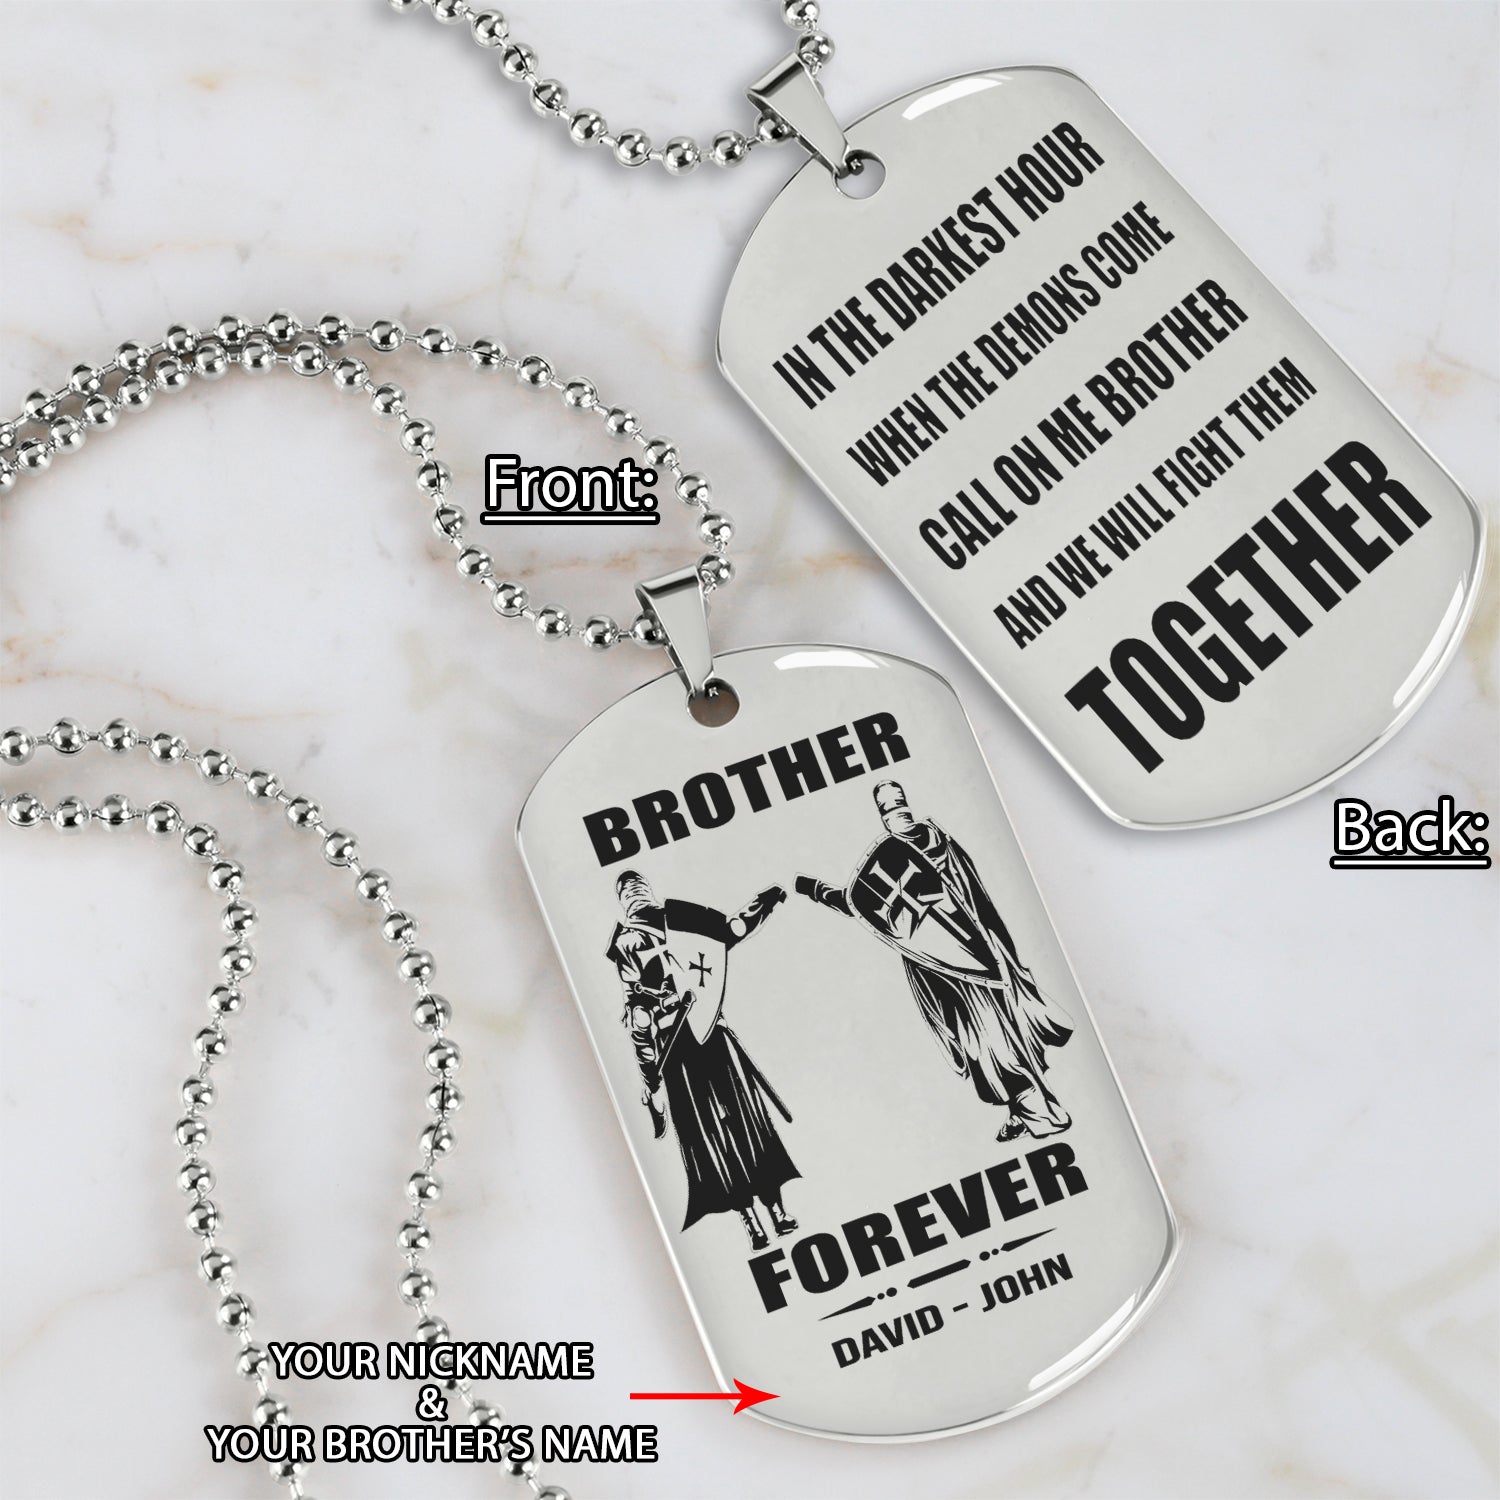 OP engraved double sided dog tag gift from brother, In the darkest hour, When the demons come call on me brother and we will fight them together, brother forever